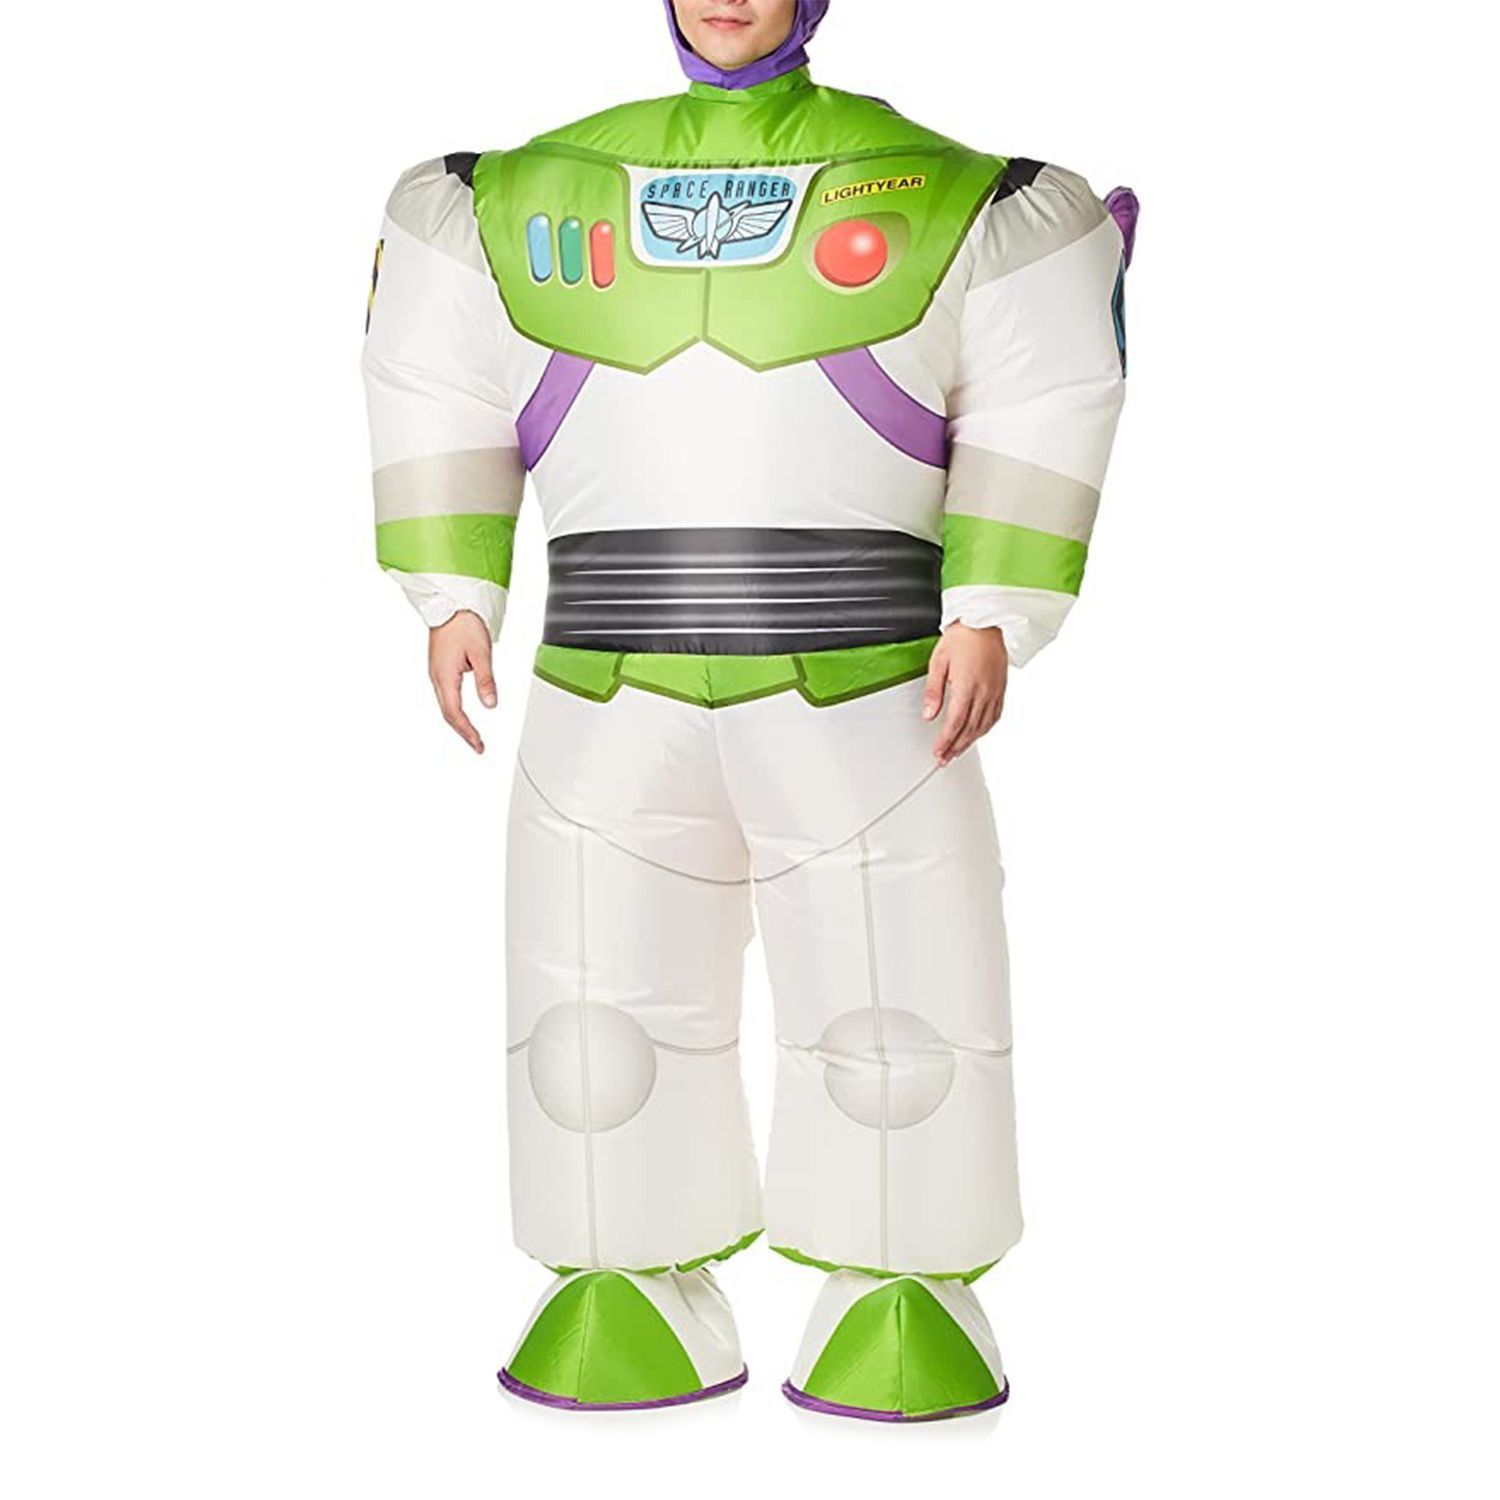 Inflatable Buzz Lightyear Costume (Adult)